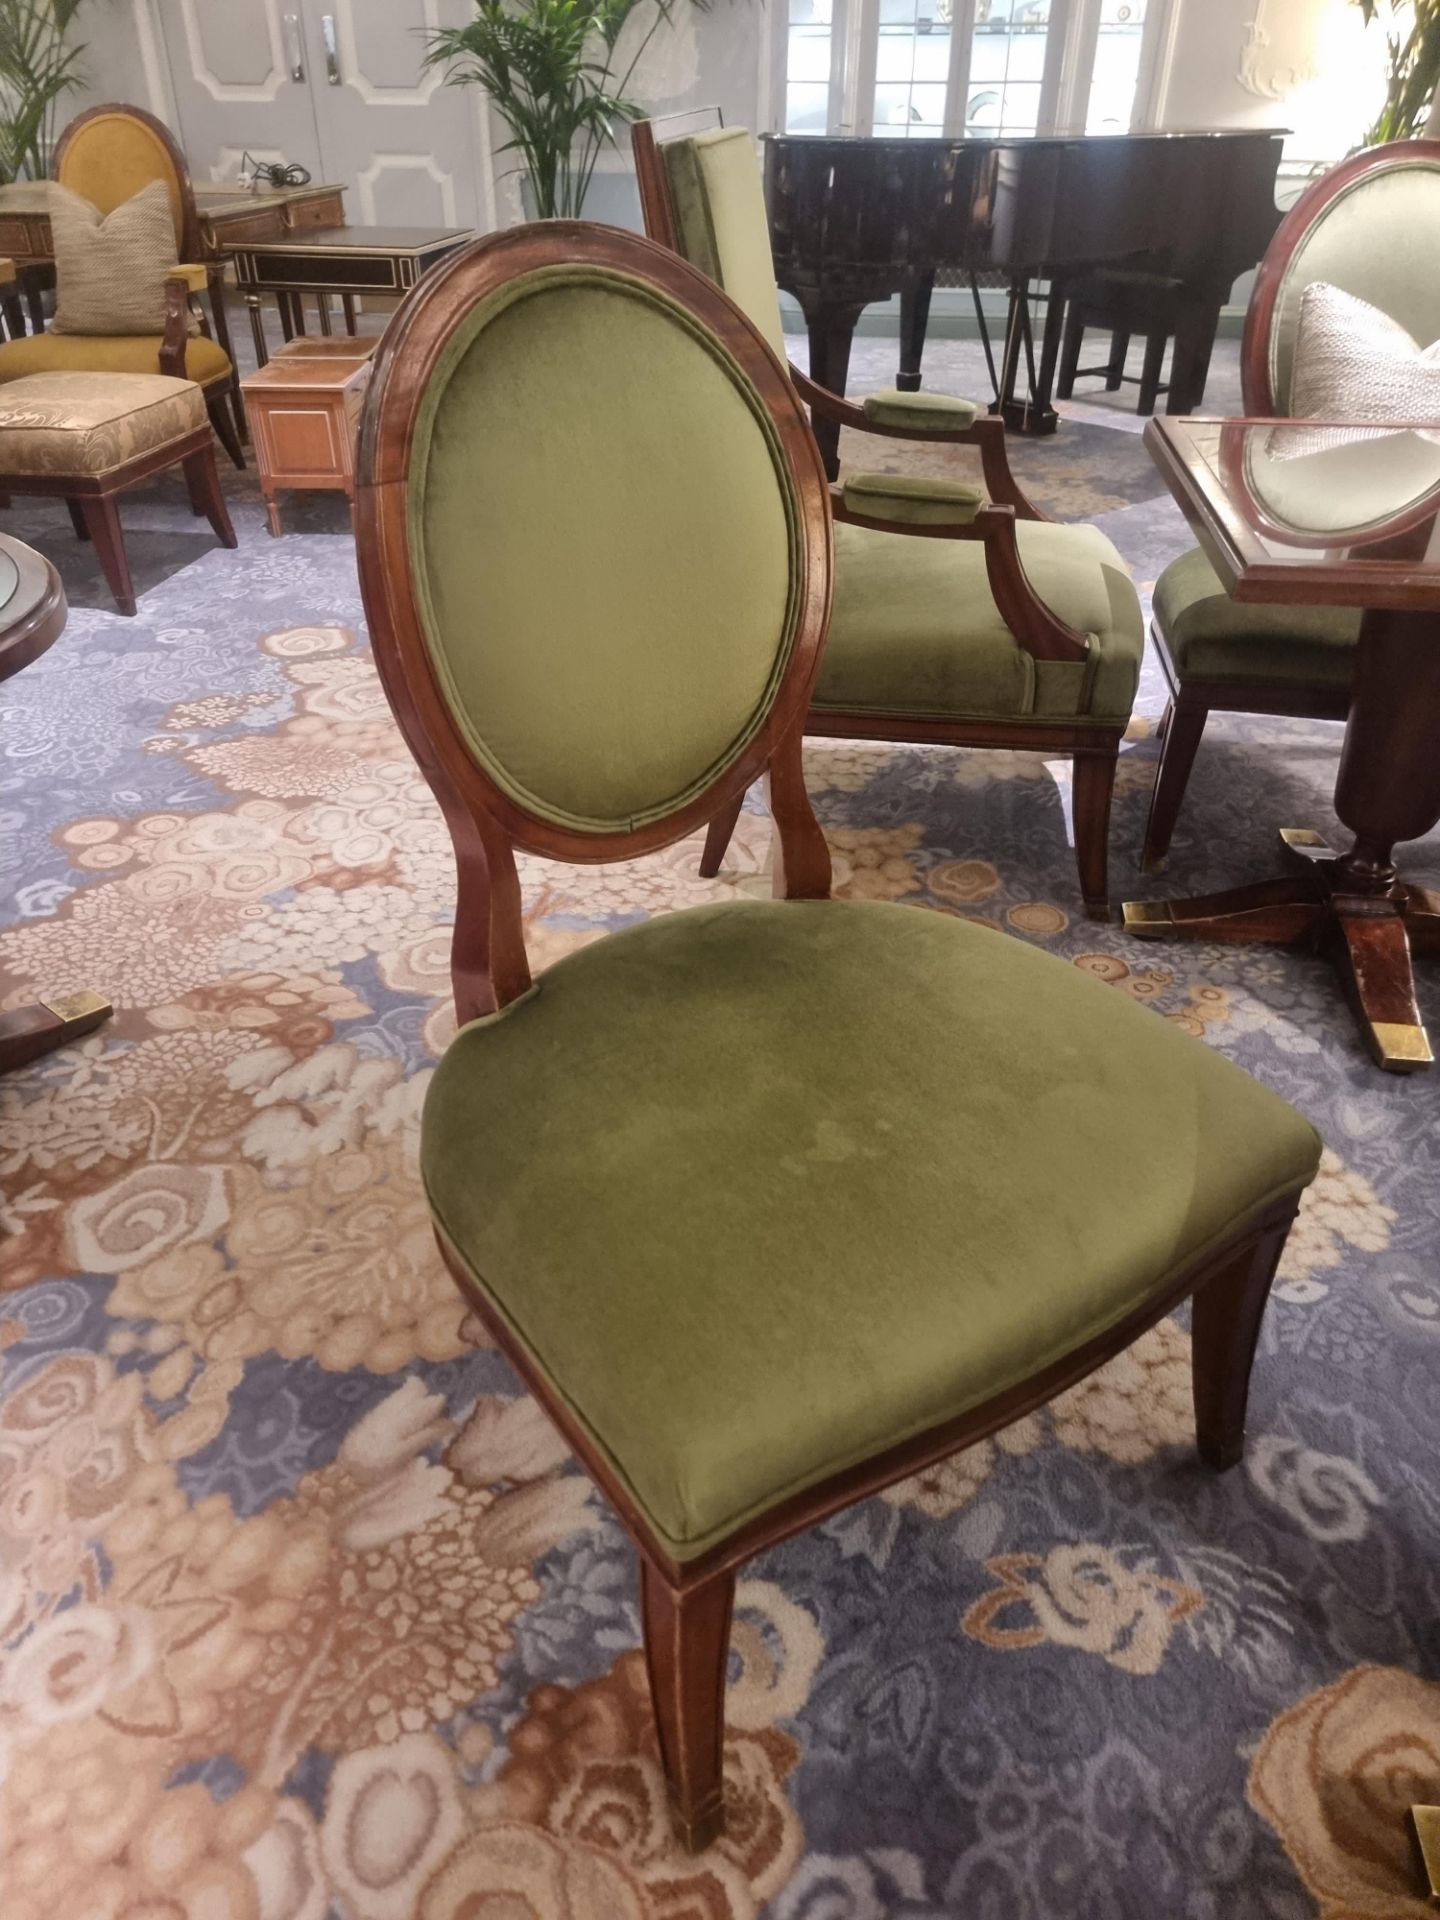 Louis XVI Style Framed And Upholstered Arm Chair In Lelievre Paris Olive Green Salon Chair 68 x 68 x - Bild 5 aus 5